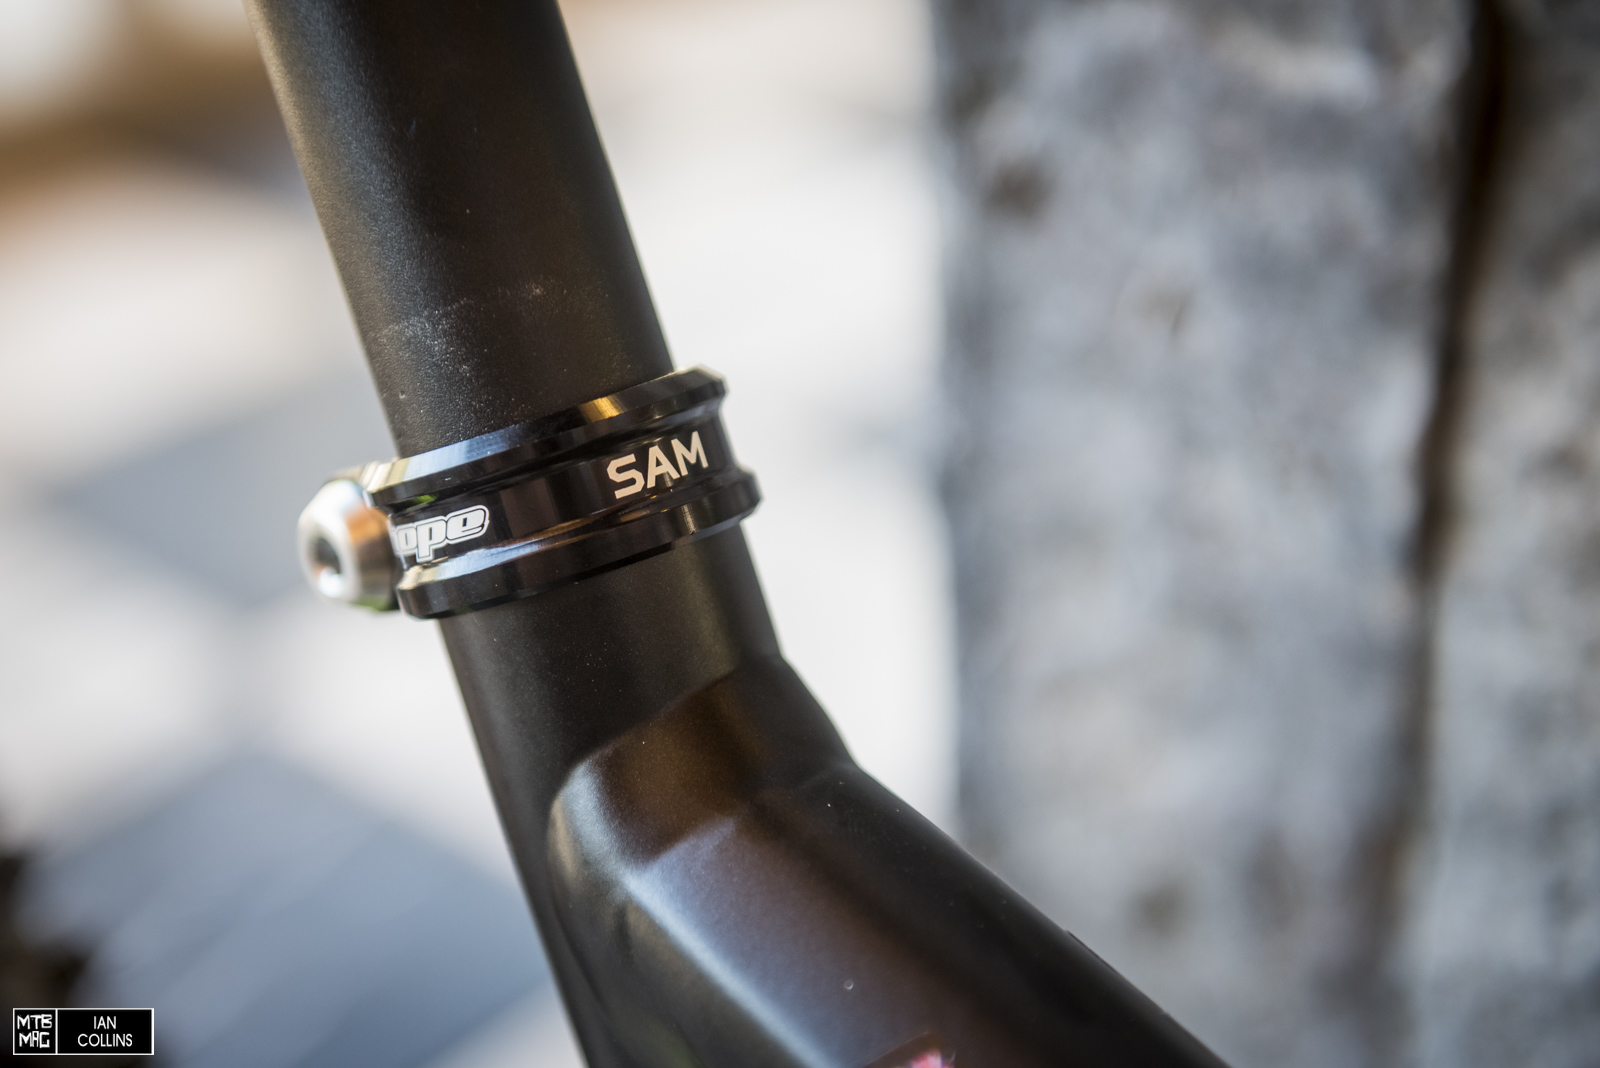 Hope custom engraved seatpost clamps for the whole team.